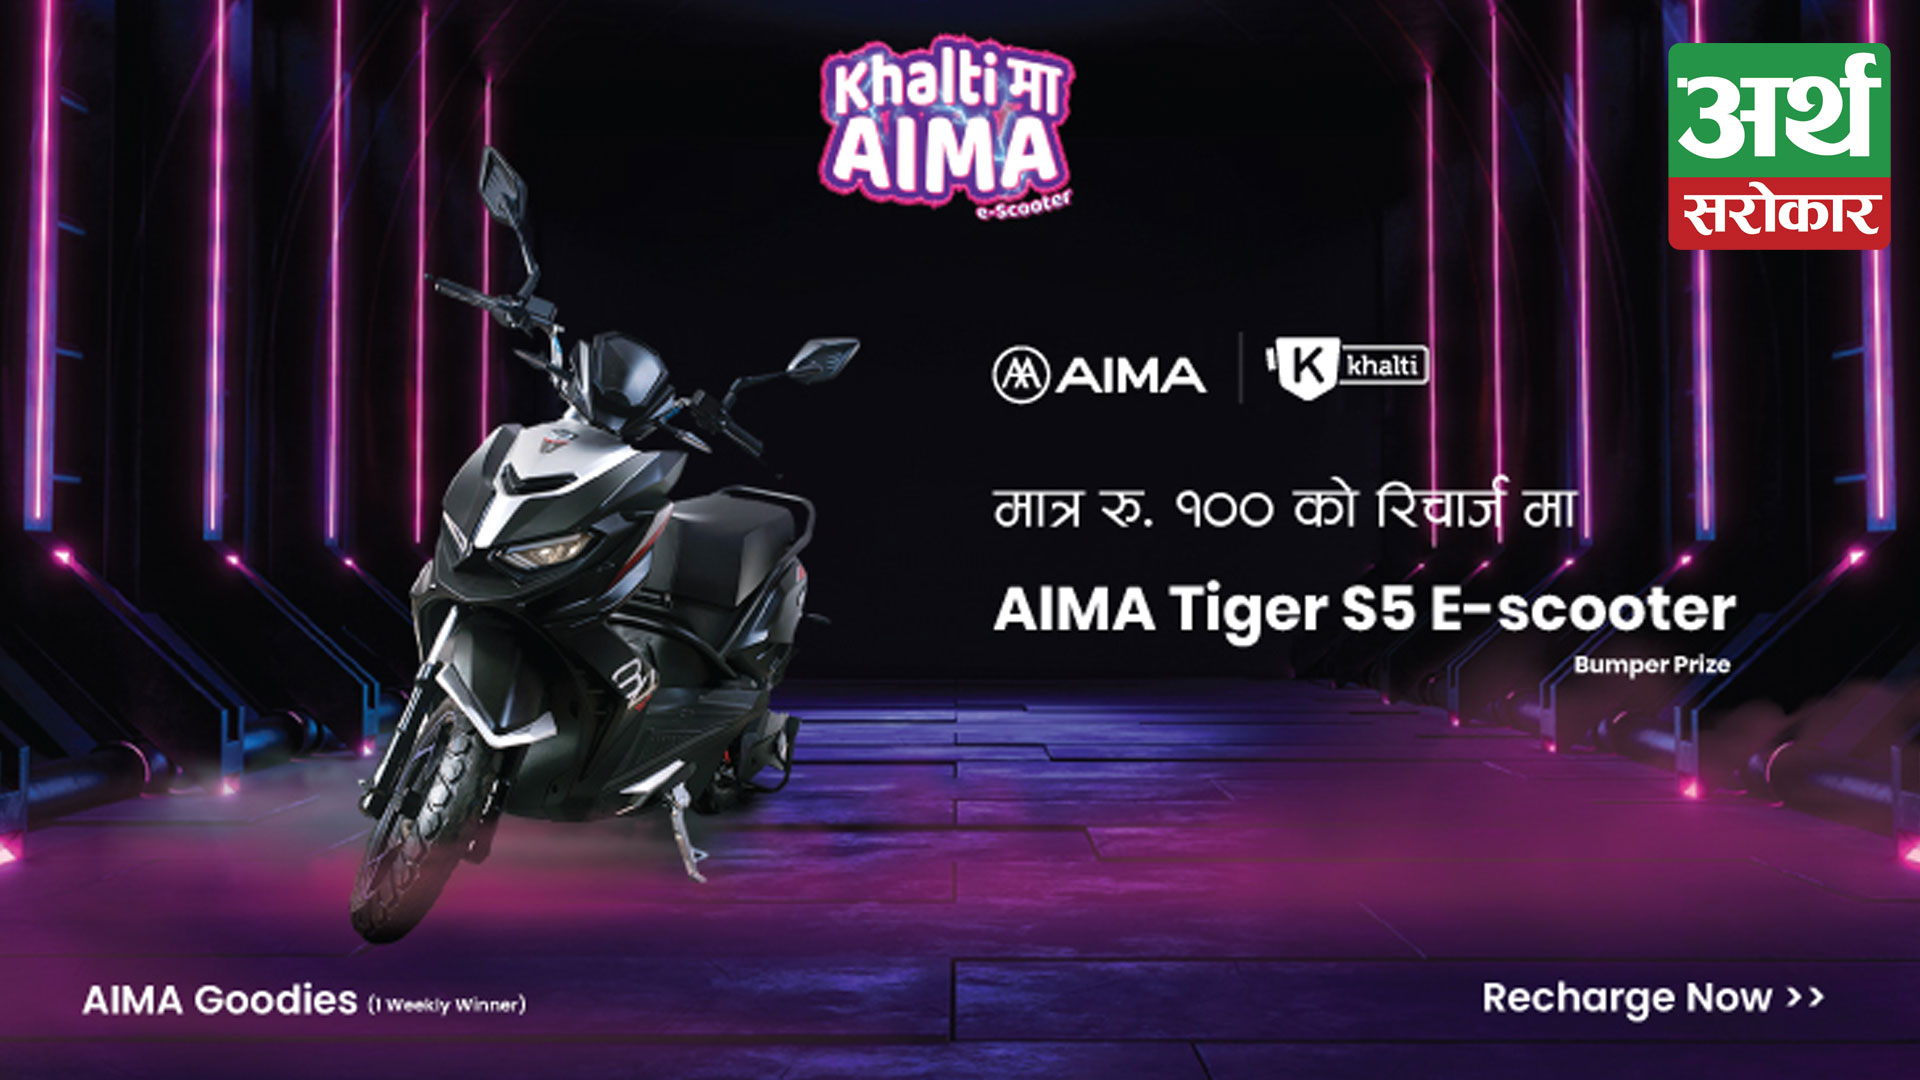 Win AIMA E-Scooter in Topup of Rs. 100 from Khalti